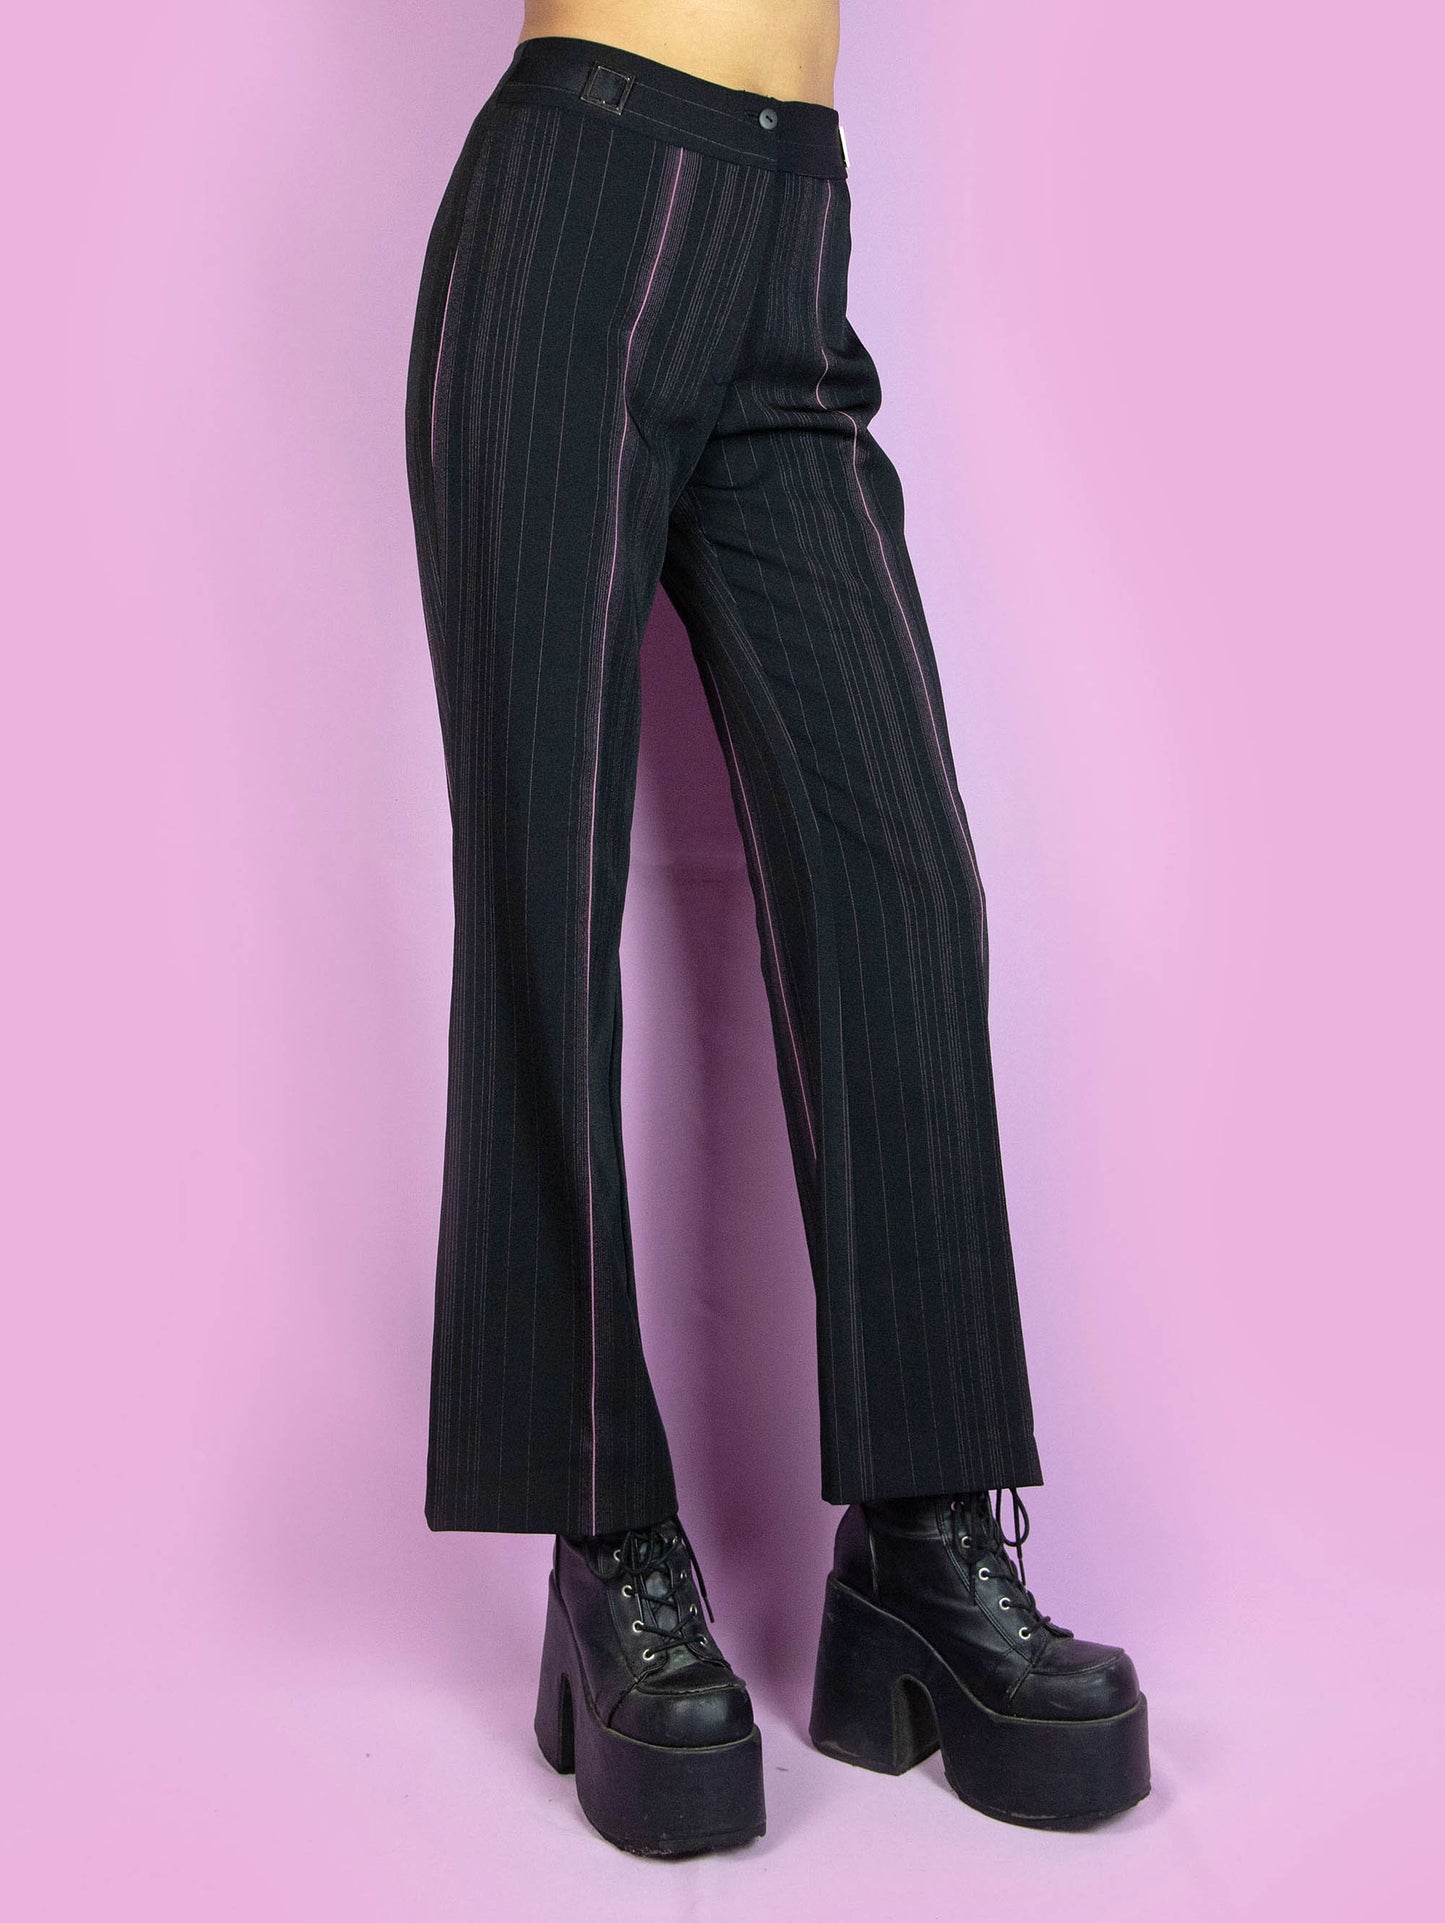 The Y2K Black Pinstripe Trousers are vintage high-waisted straight black and pink pinstripe pants, slightly elastic, with pleats and a front zipper closure. Elegant tailored style 2000s office pleated striped trousers.